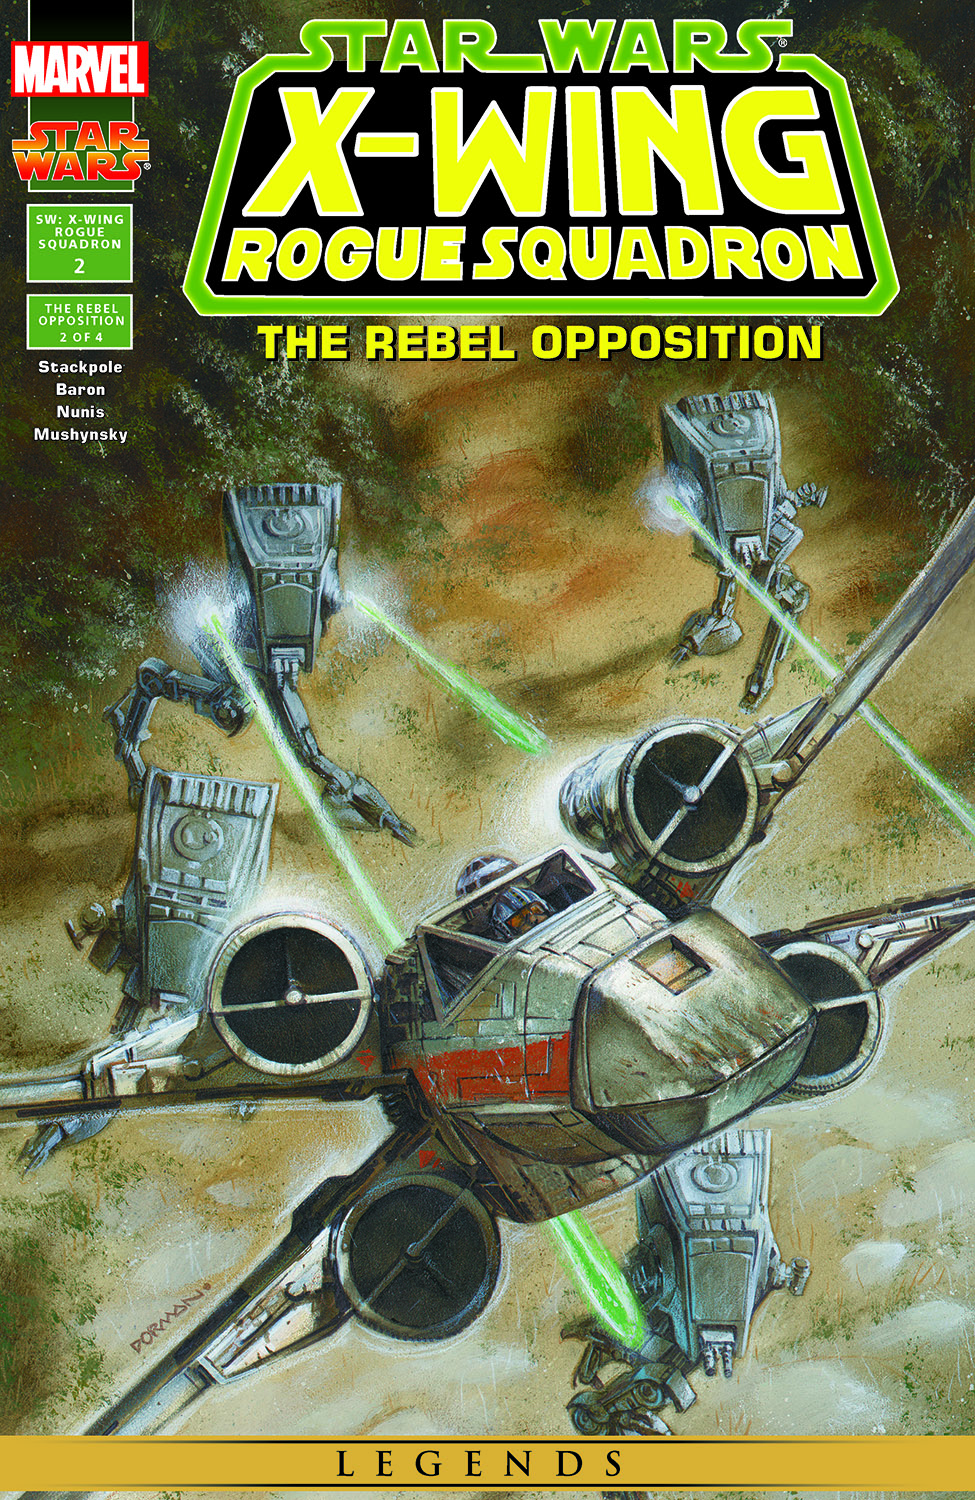 Star Wars: X-Wing Rogue Squadron (1995) #2